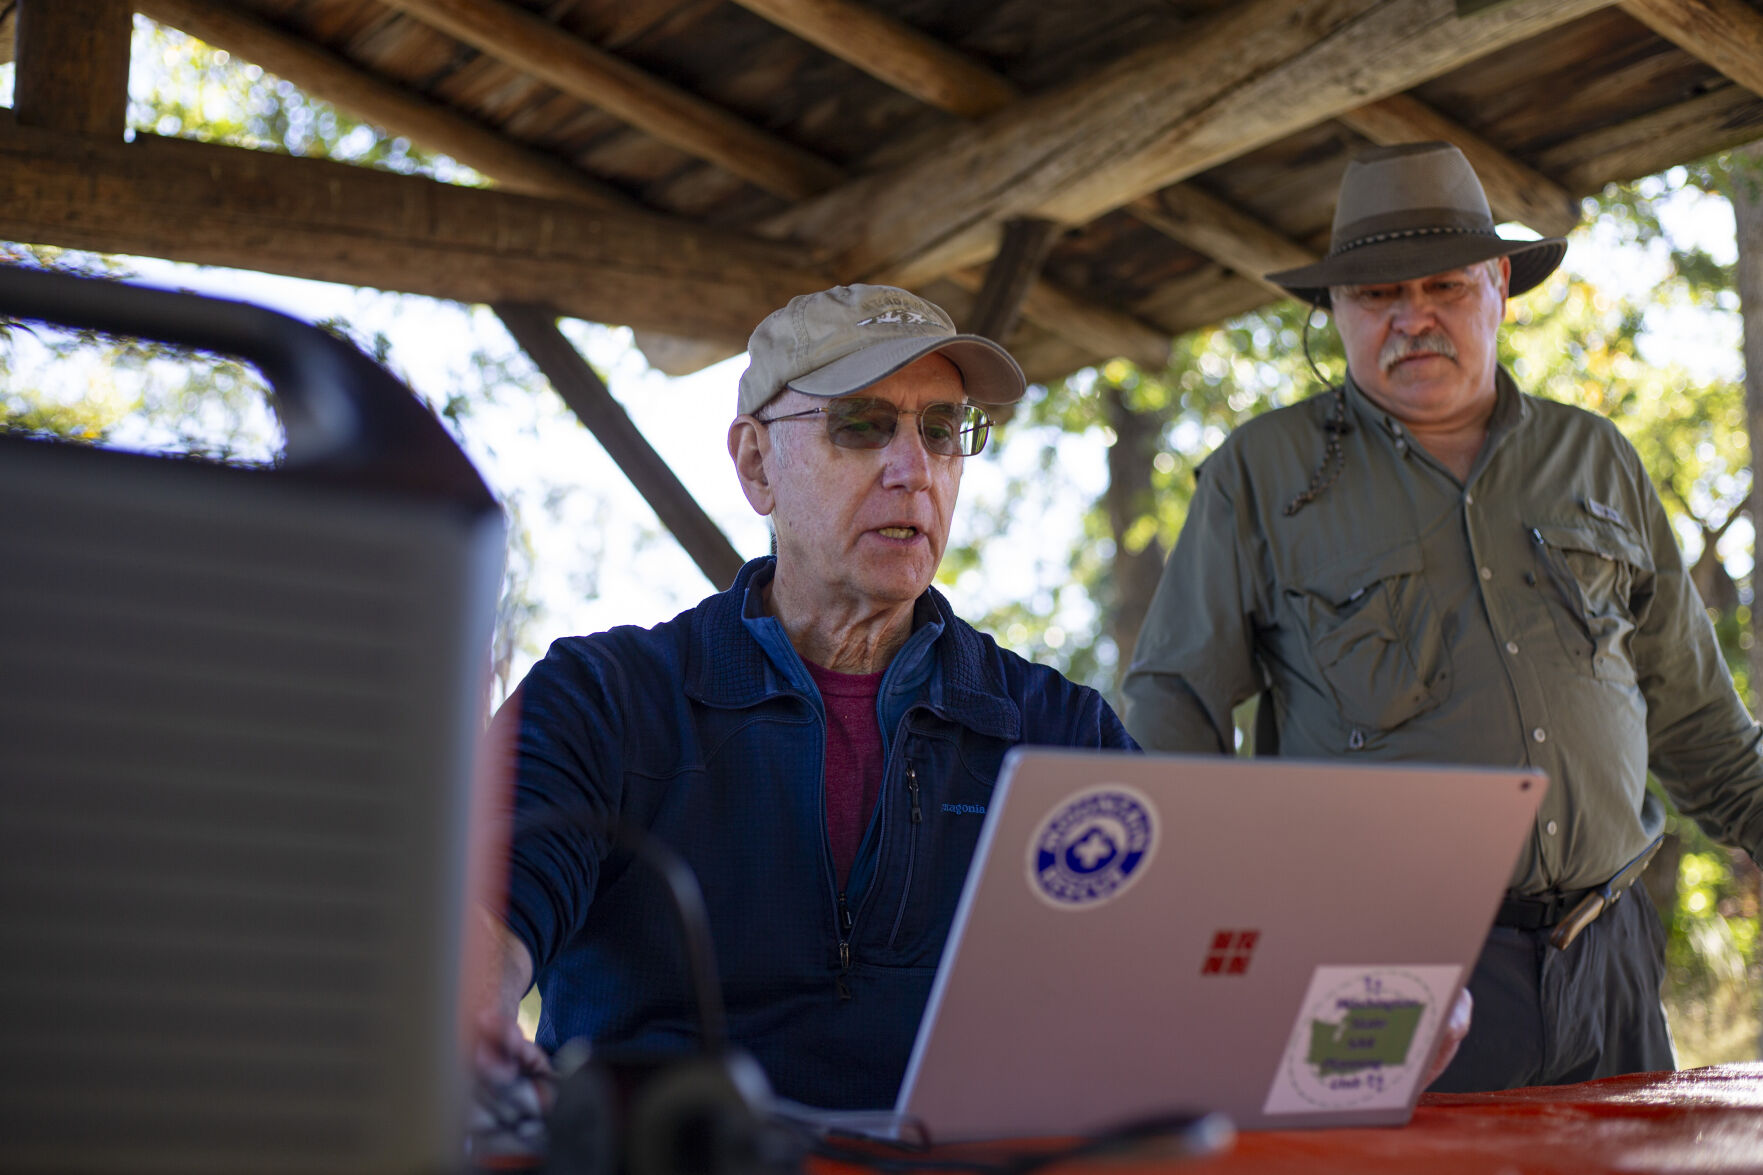 Guy Mansfield, with the Washington State Search And Rescue Planning Unit, uses high-tech mapping systems on a laptop at Fort Simcoe Historical State Park in search of hidden remains.